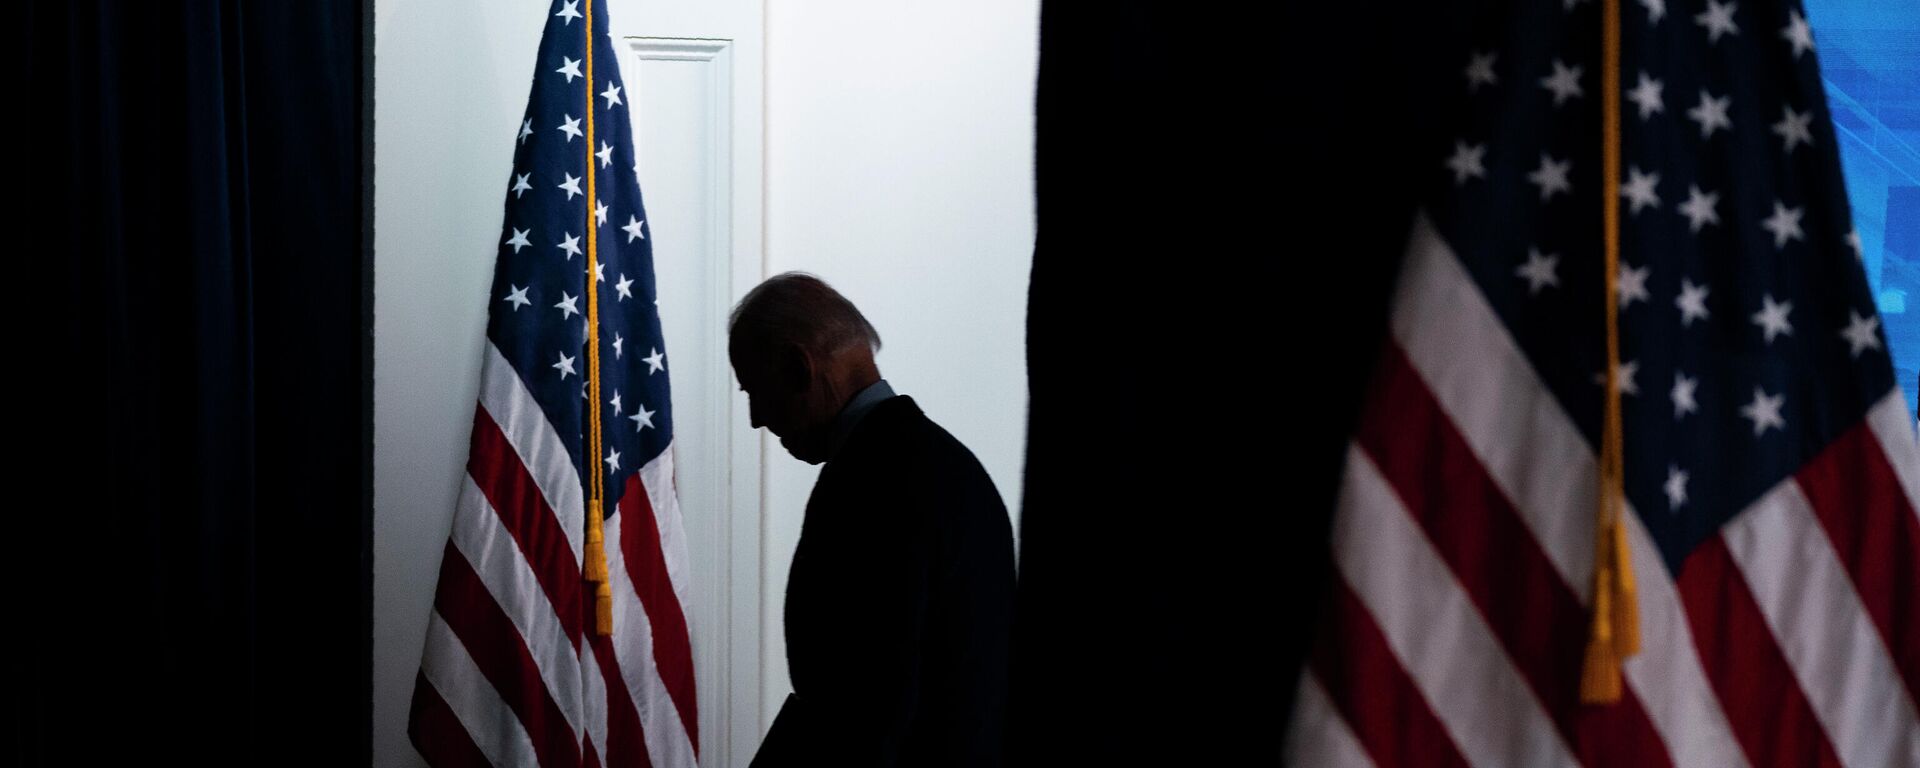 President Joe Biden walks away after speaking about COVID-19 vaccinations at the White House, Wednesday, April 21, 2021, in Washington - Sputnik International, 1920, 01.07.2022